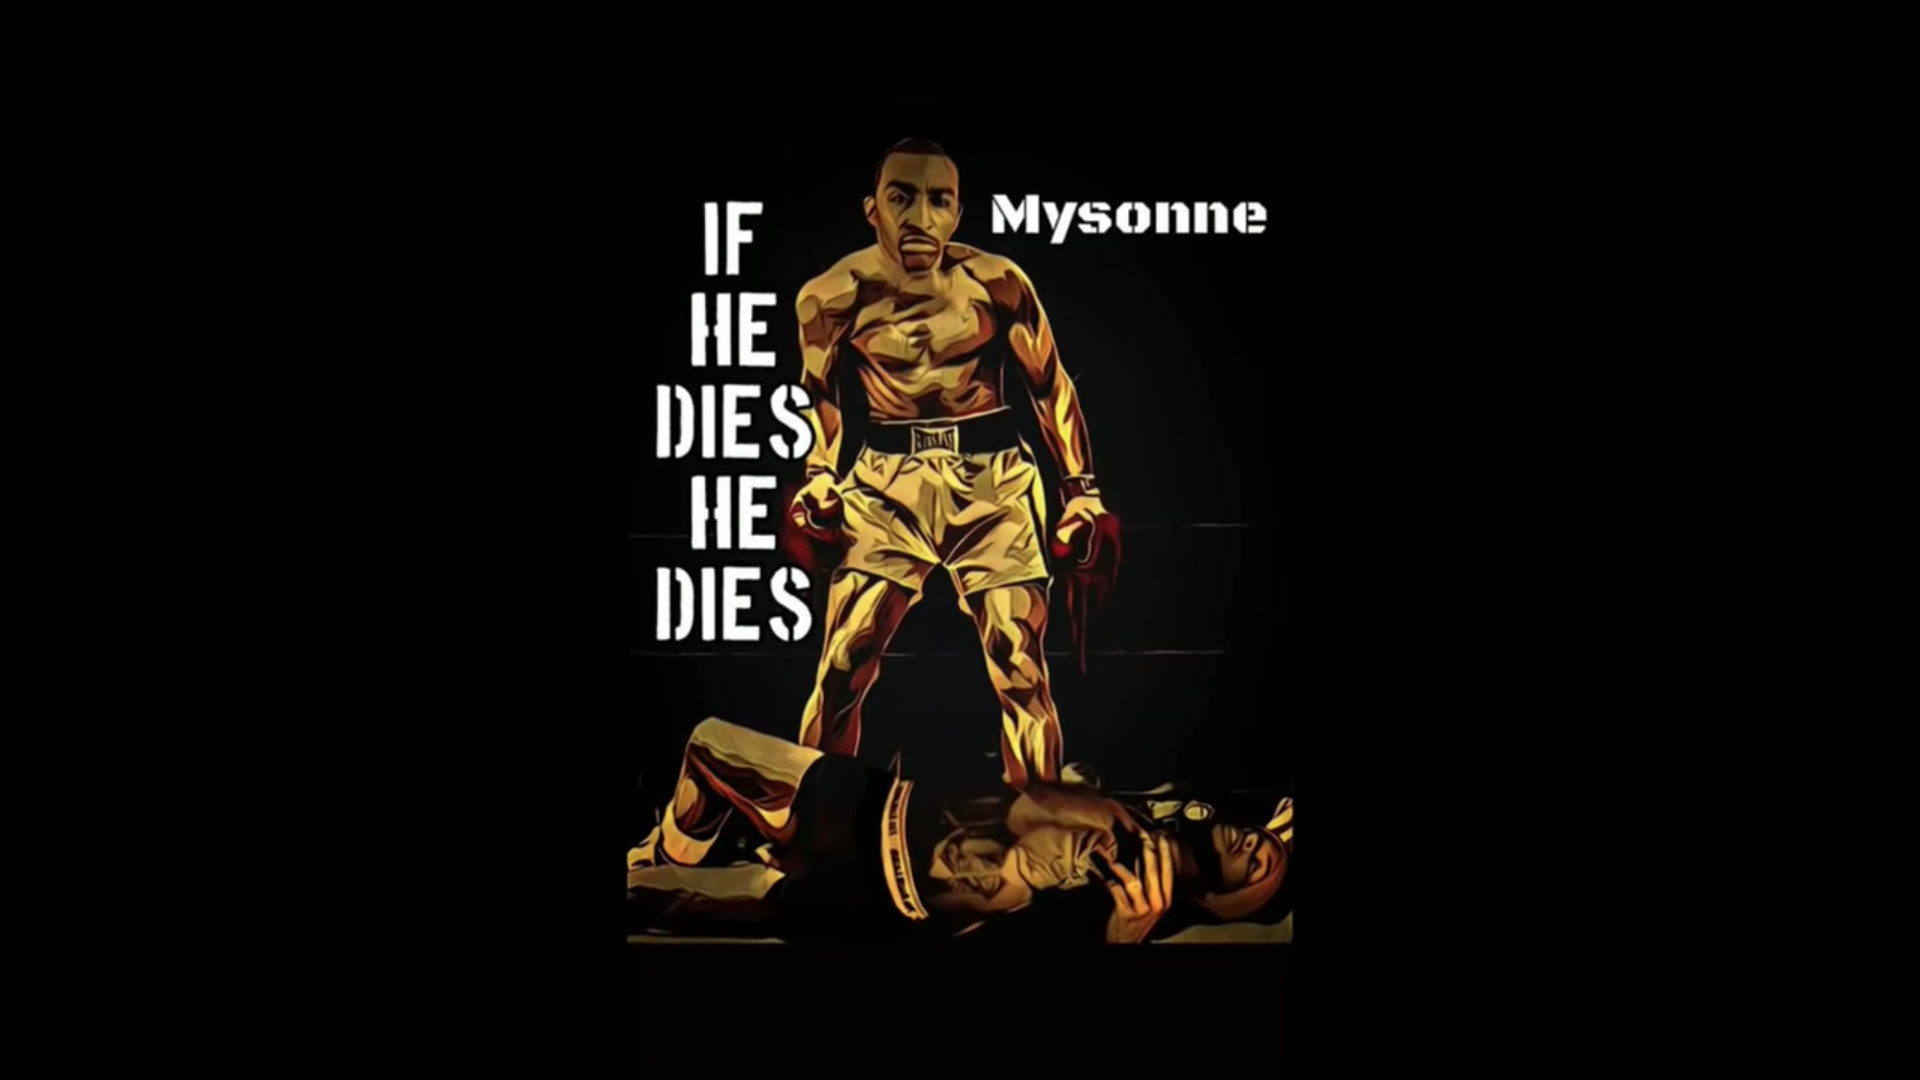 Mysonne Hops On The Tory Lanez Extravaganza With “If He Dies He Dies”